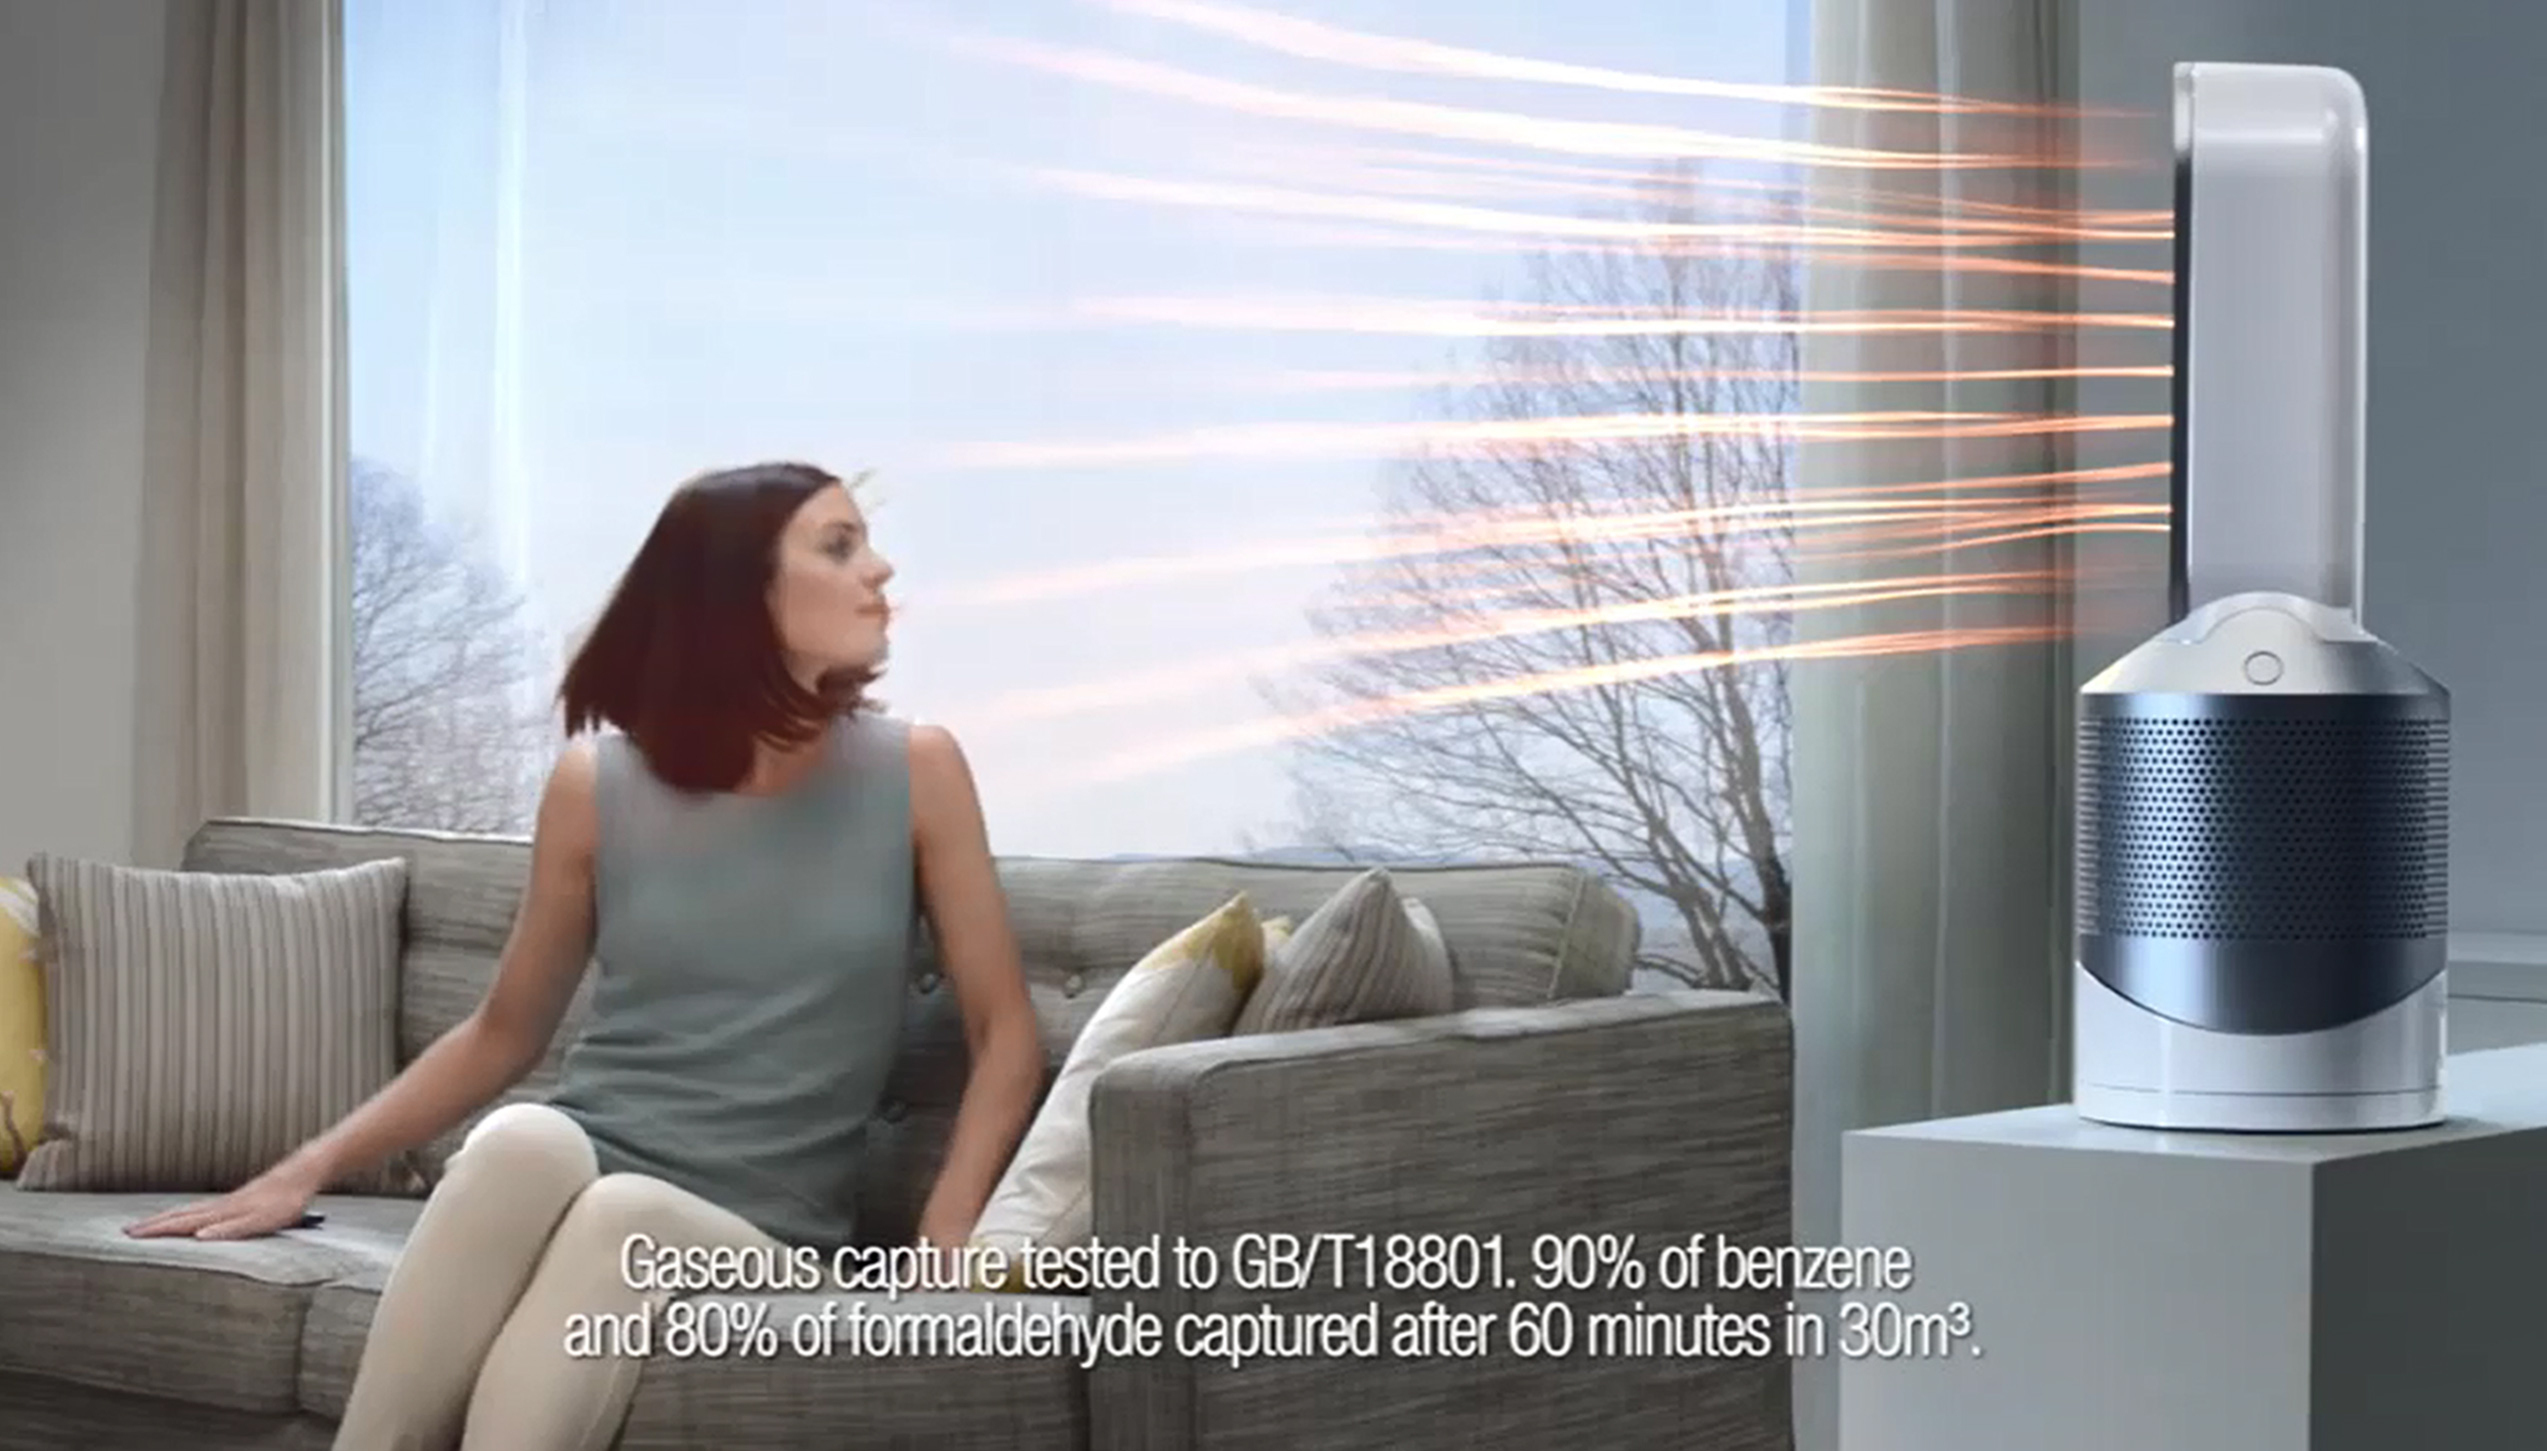 The television ad for the British company's purifier heater, seen in May, showed a woman at the window of her house looking visibly concerned, before cutting to a car exhaust producing green vapour. (ASA/PA Wire)